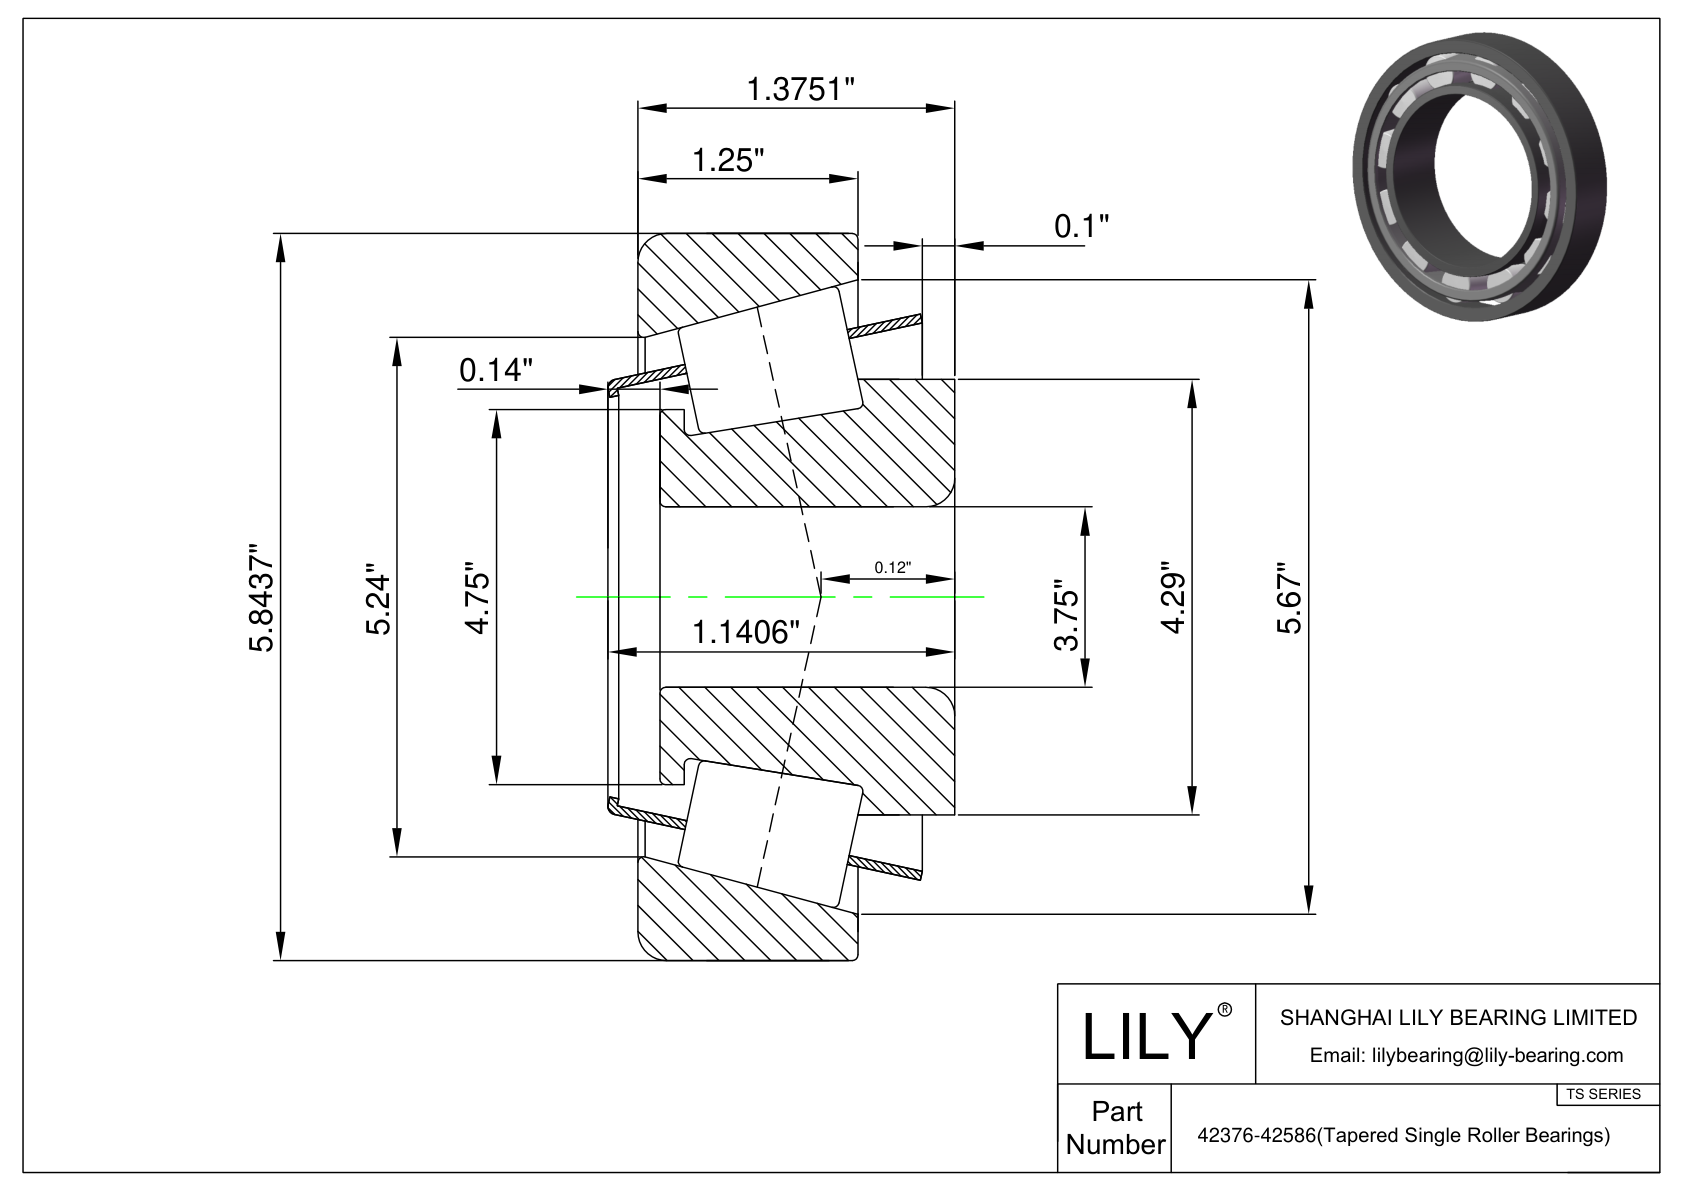 42376-42586 TS (Tapered Single Roller Bearings) (Imperial) cad drawing